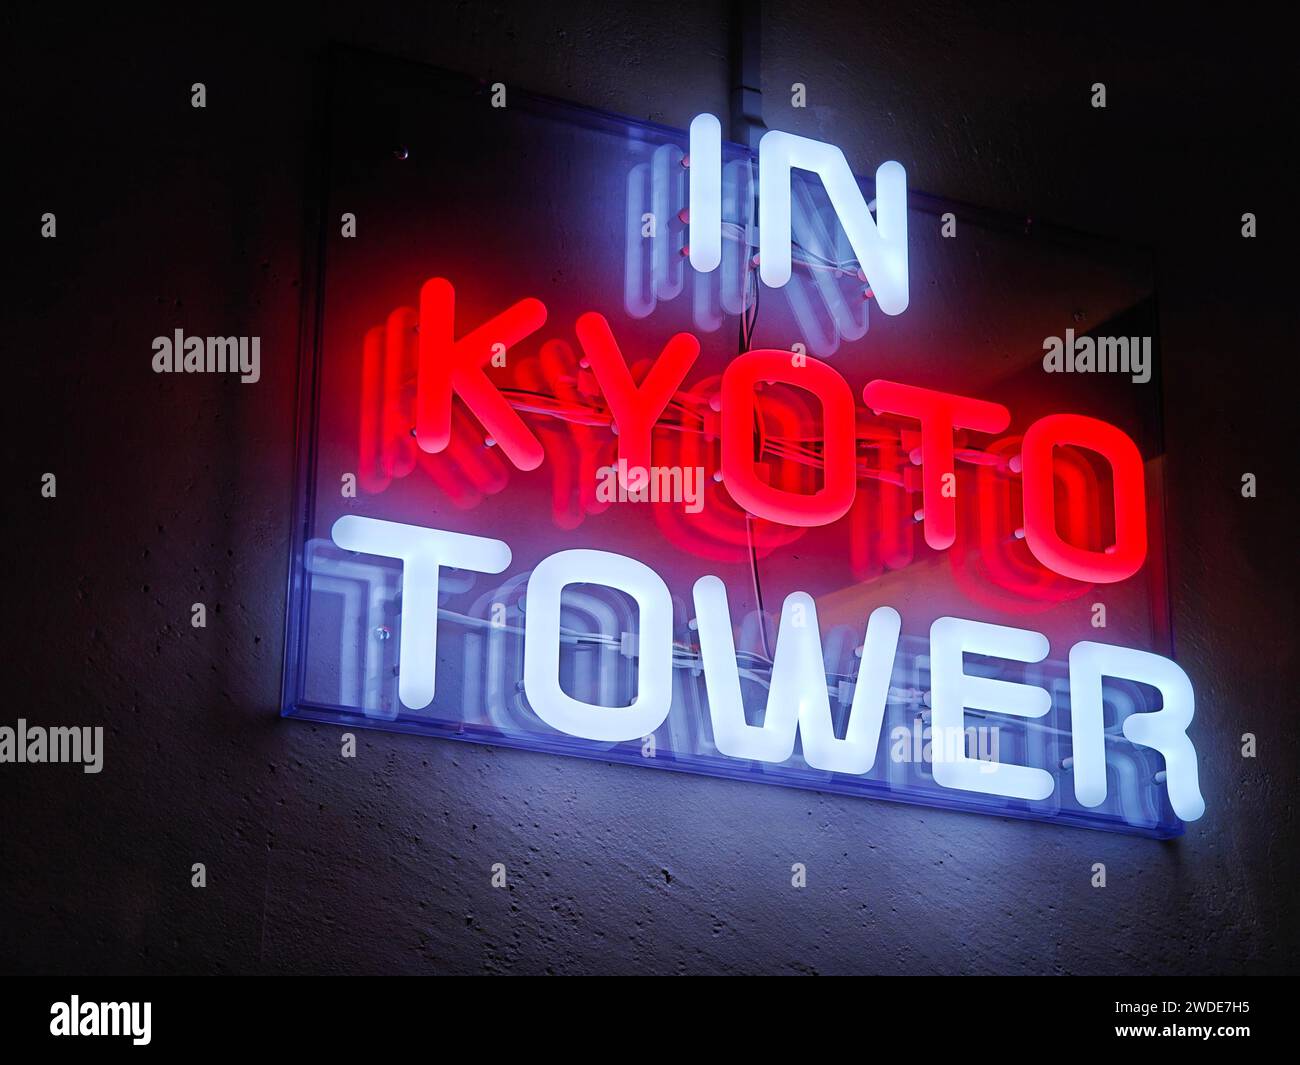 A red and white neon sign saying 'In Kyoto Tower',  Kyoto, Japan Stock Photo